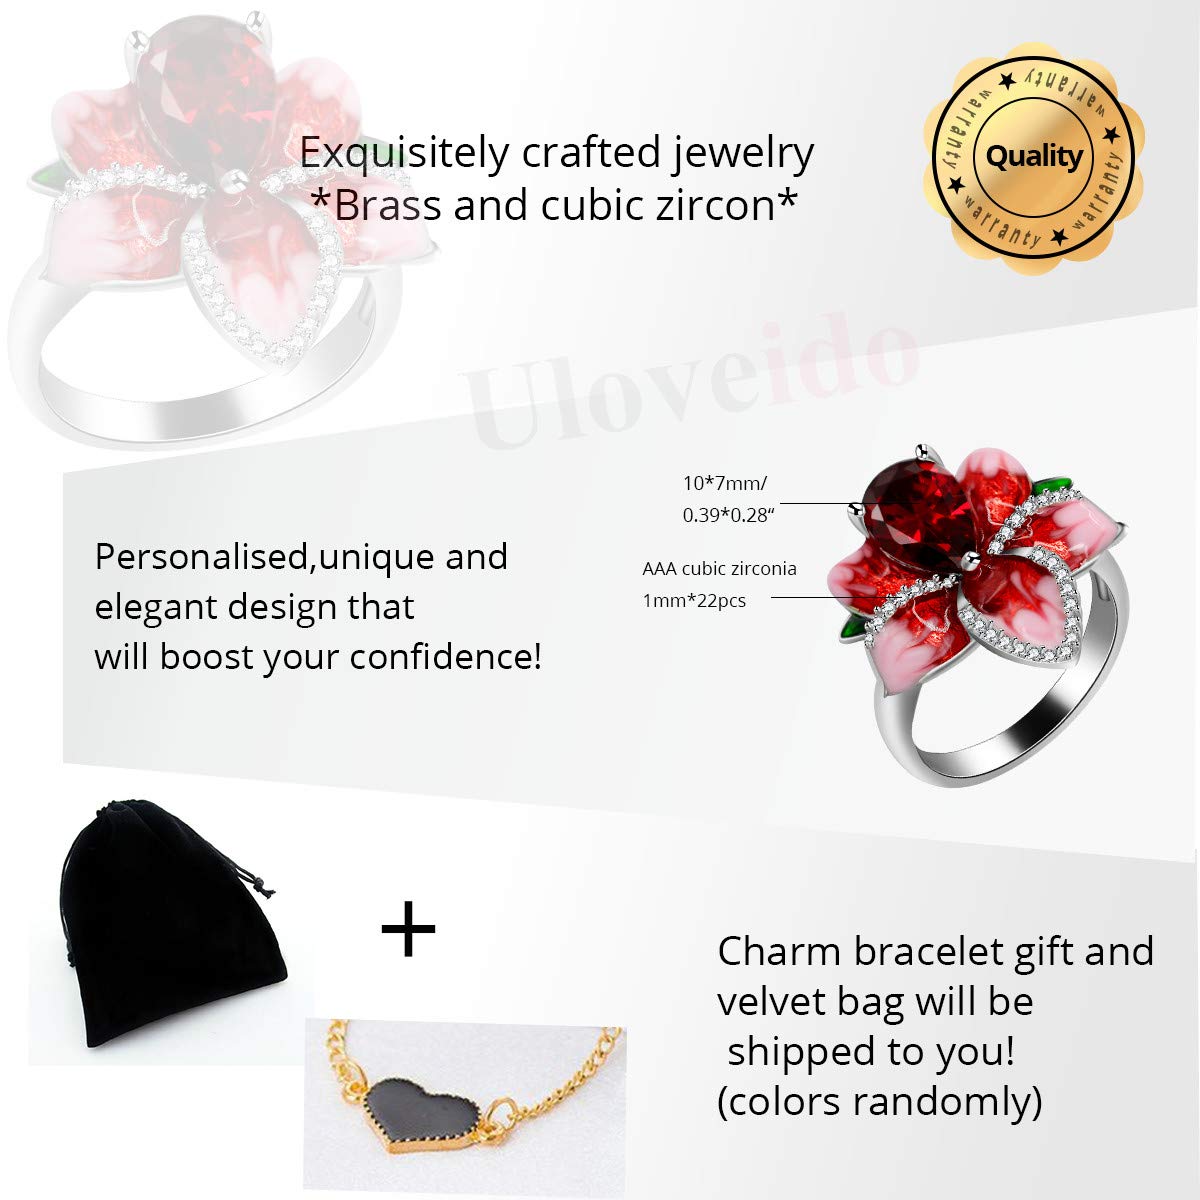 Uloveido Girl's Beautiful Red Enamel Rose Ring for Women Blossom Flower Rings with Pear Cut Cubic Zirconia Cocktail Summer Ring RA627